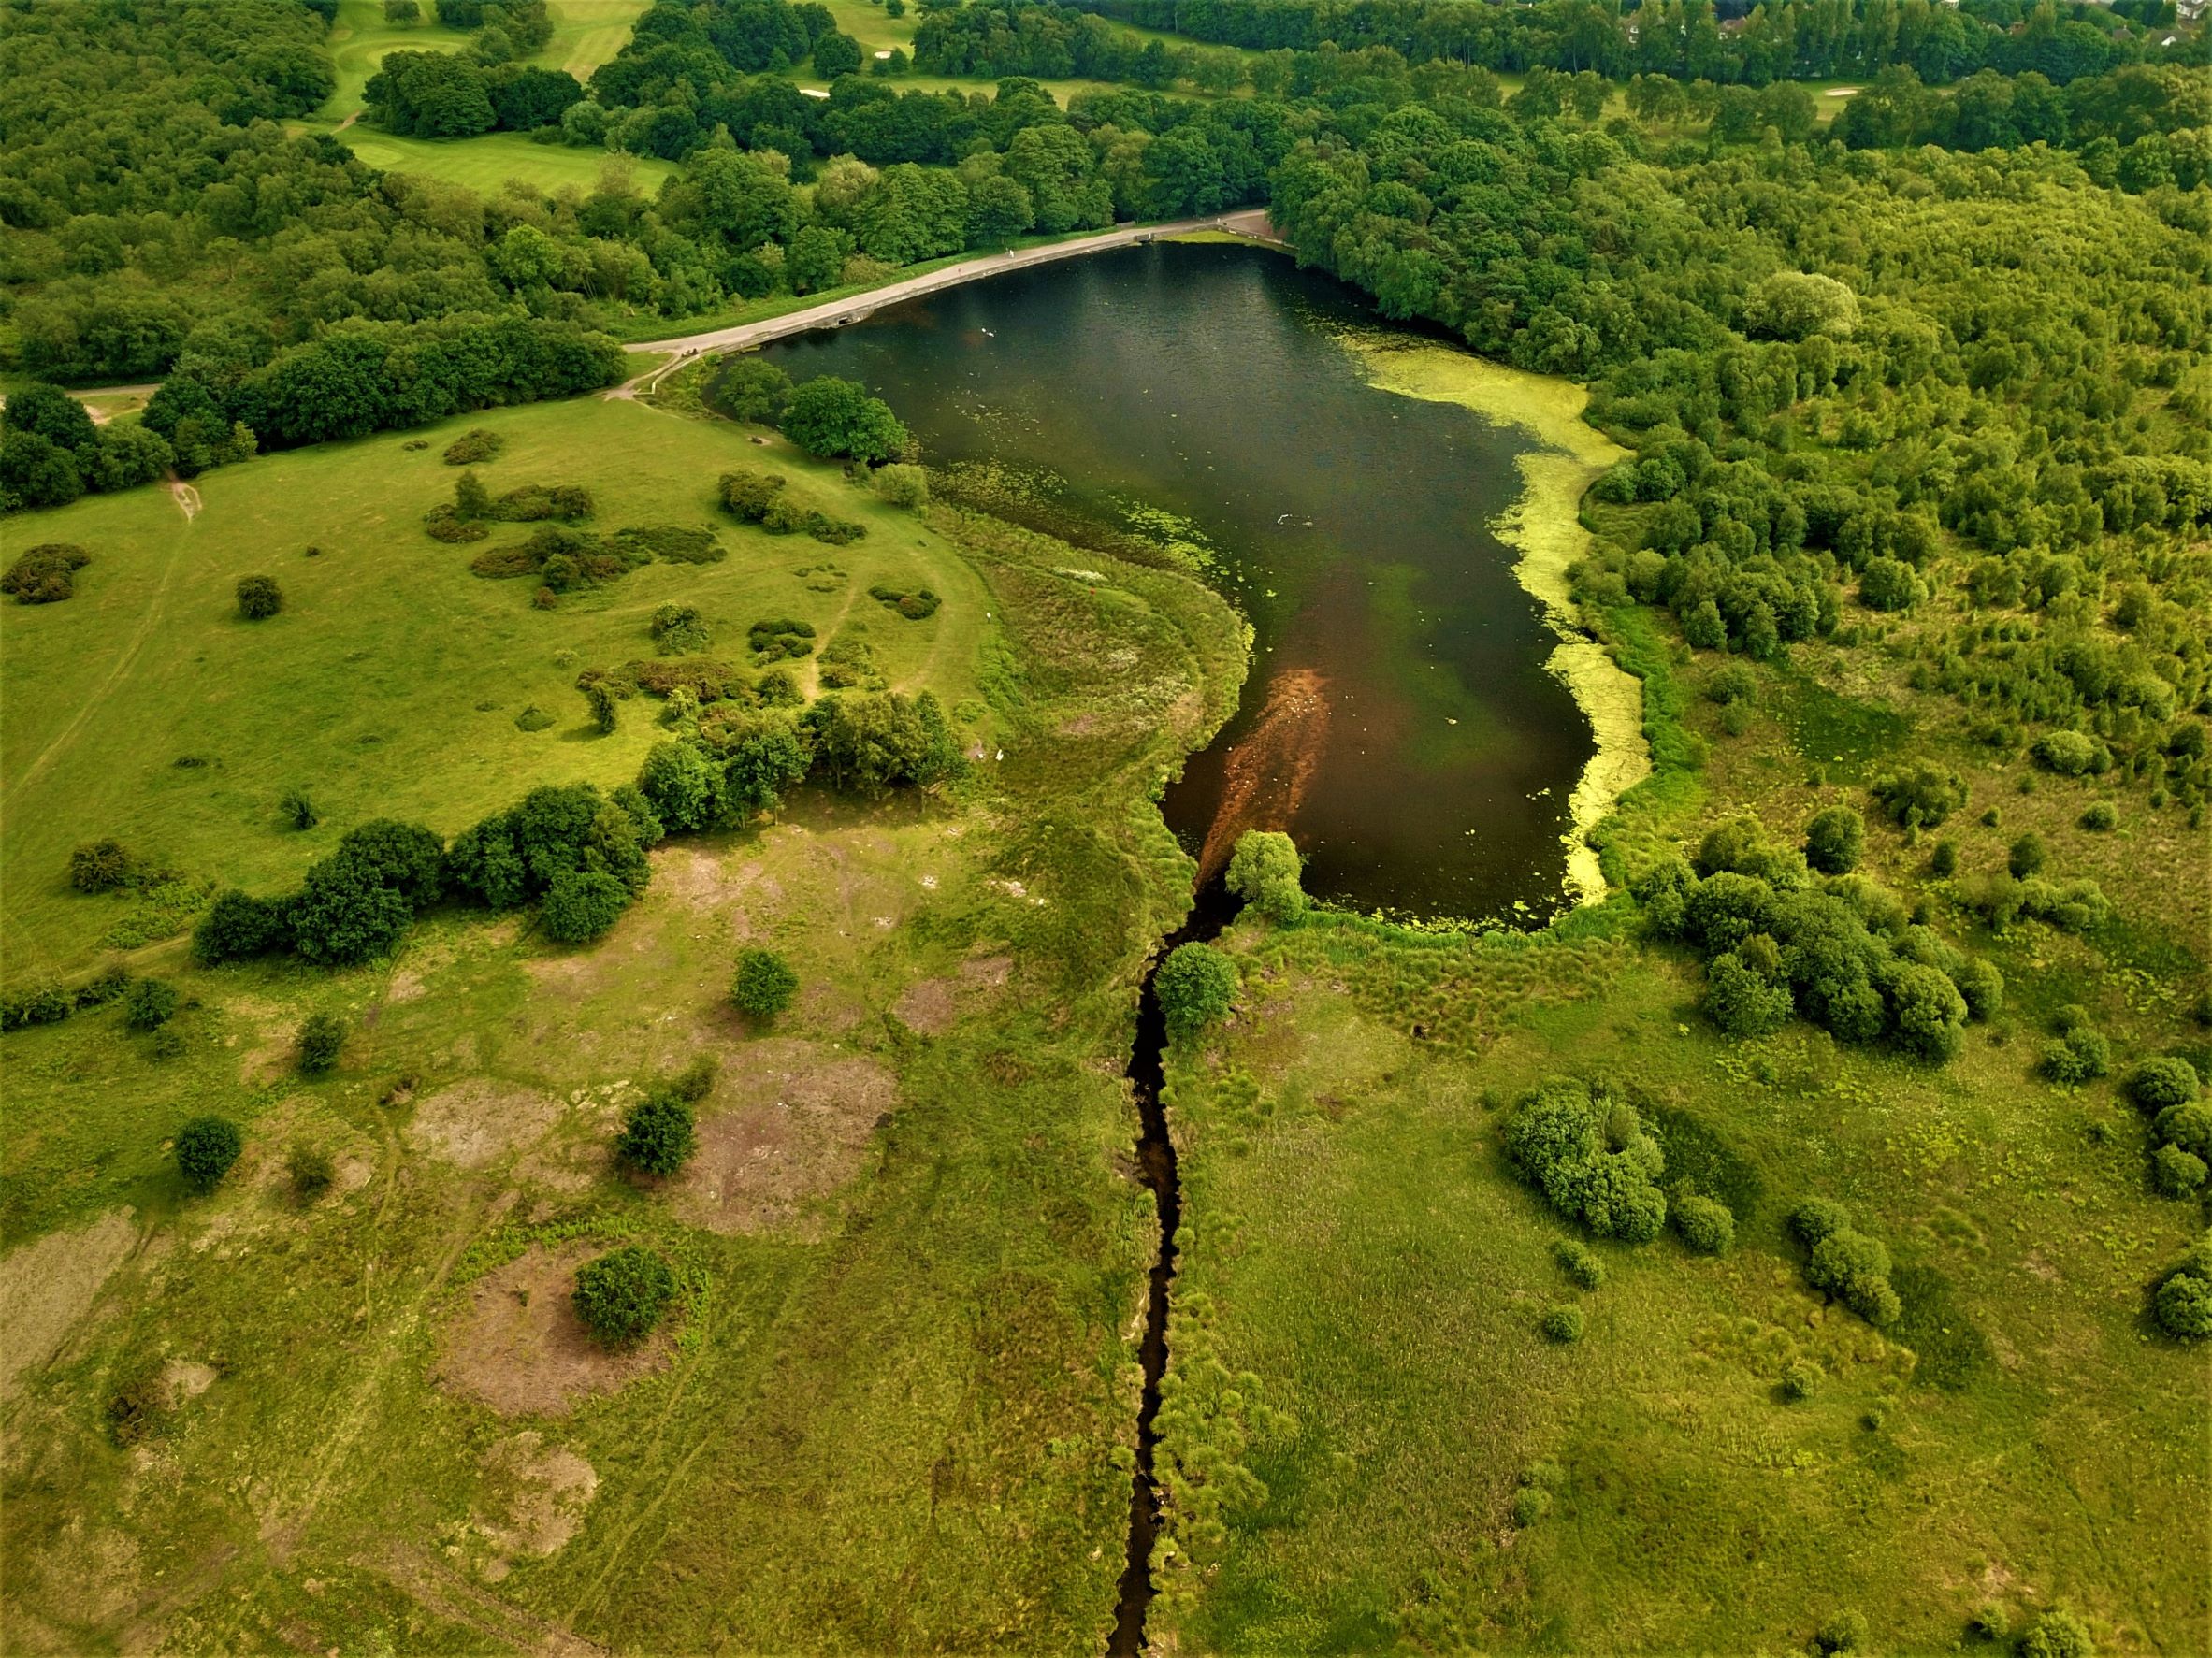 Overview of Sutton Park, one of the Birmingham favourite parks